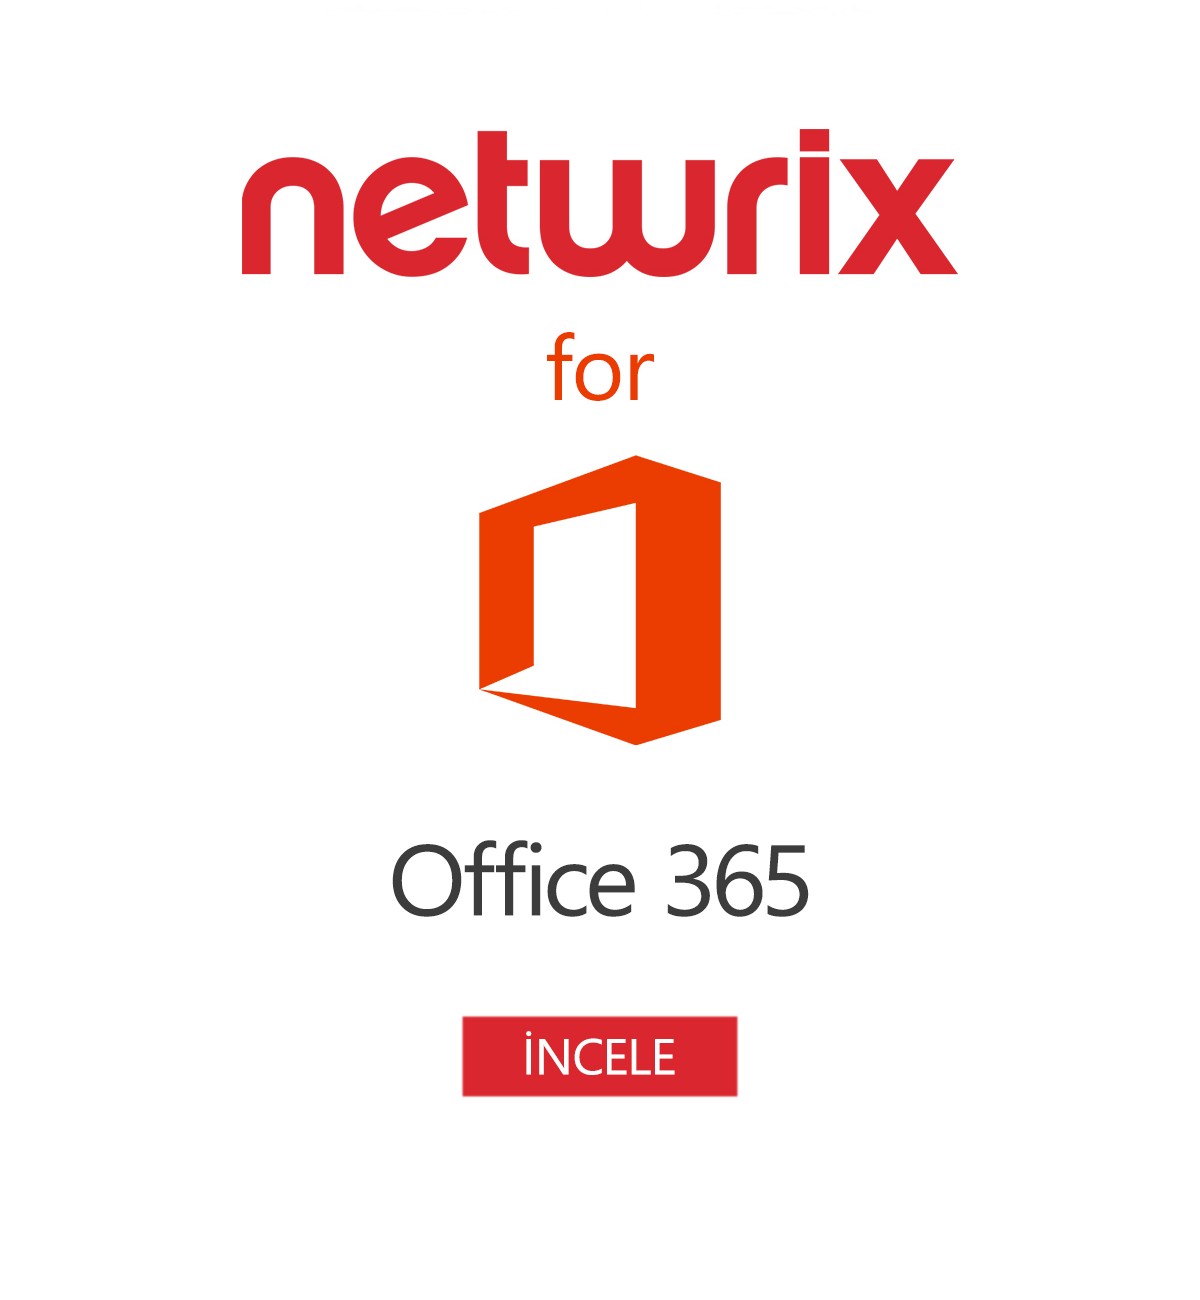 Netwrix Auditor for Office 365